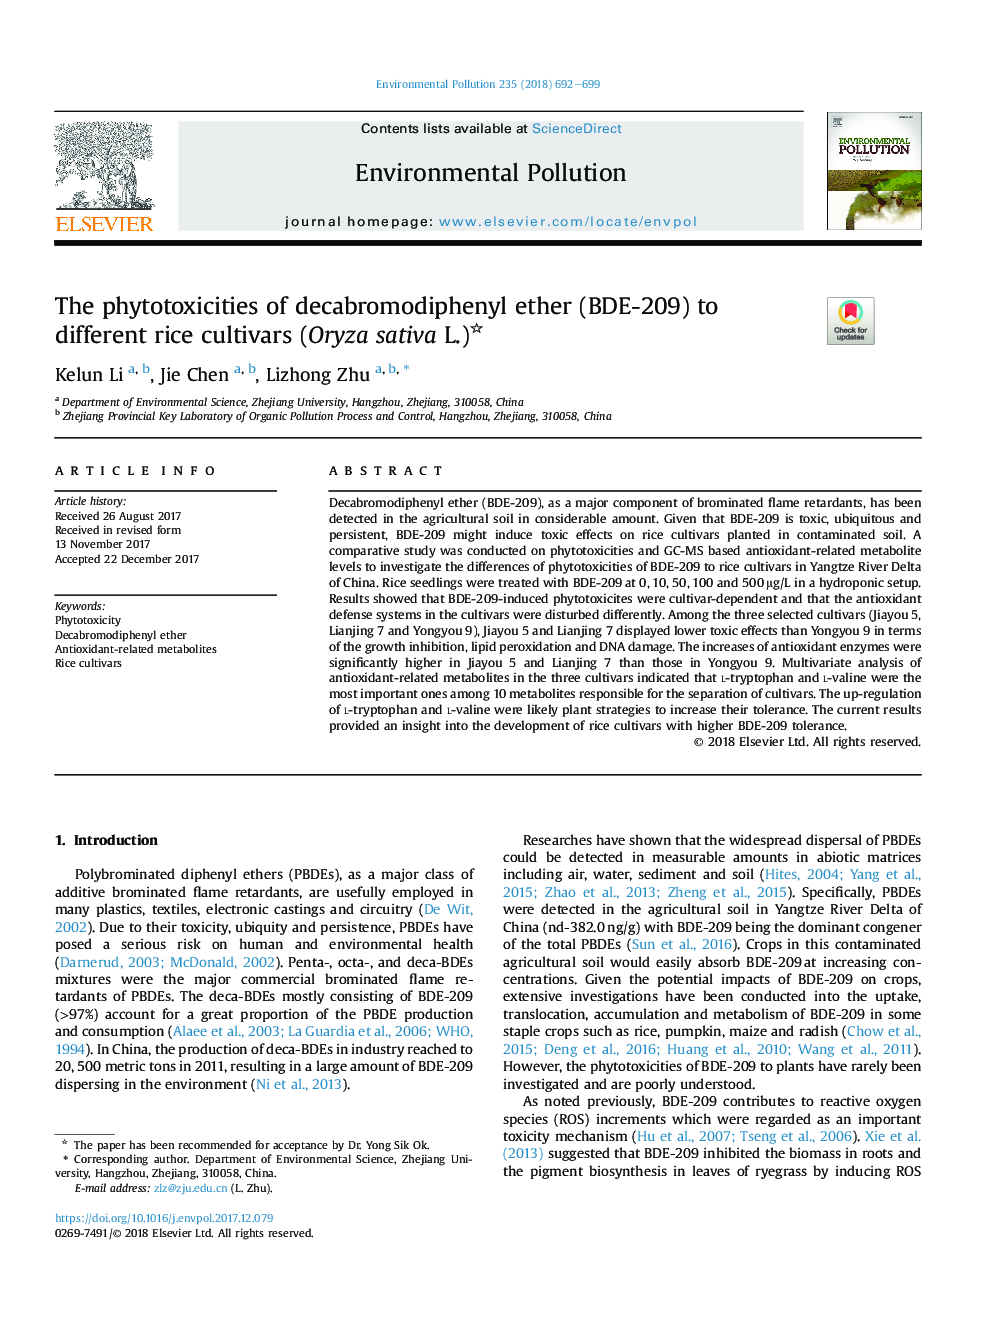 The phytotoxicities of decabromodiphenyl ether (BDE-209) to different rice cultivars (Oryza sativa L.)